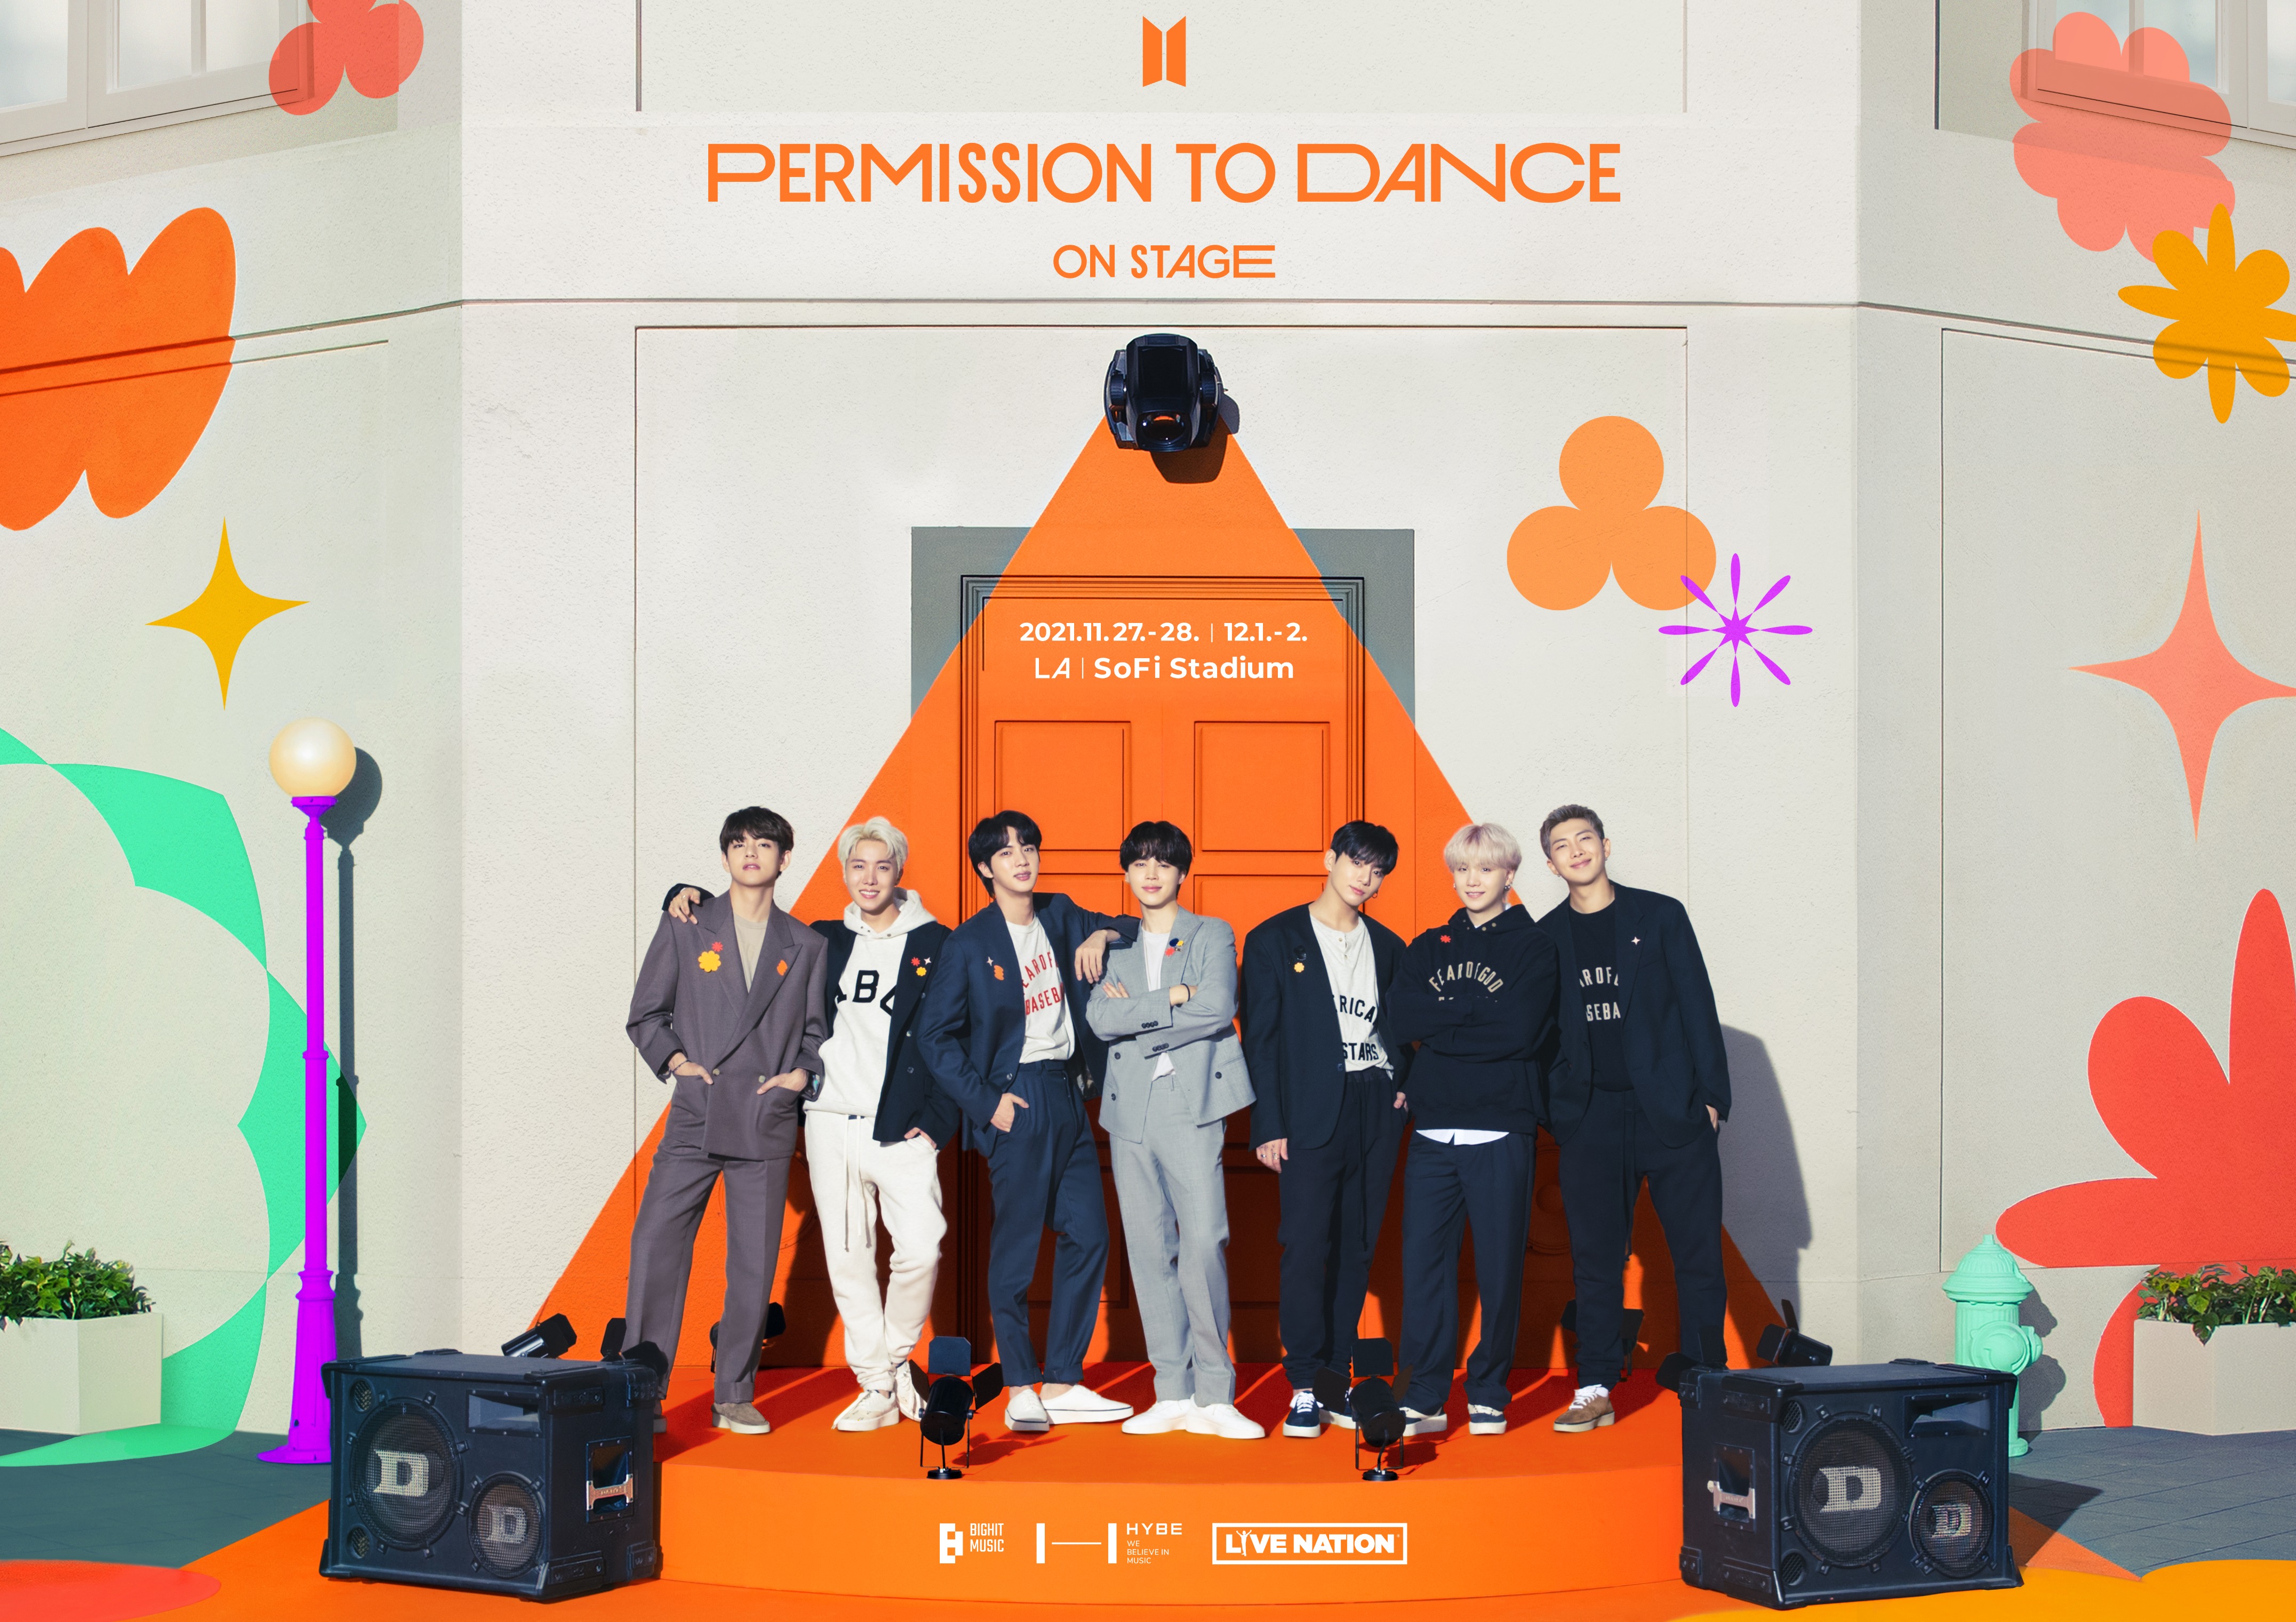 BTS Permission to Dance on Stage Teaser